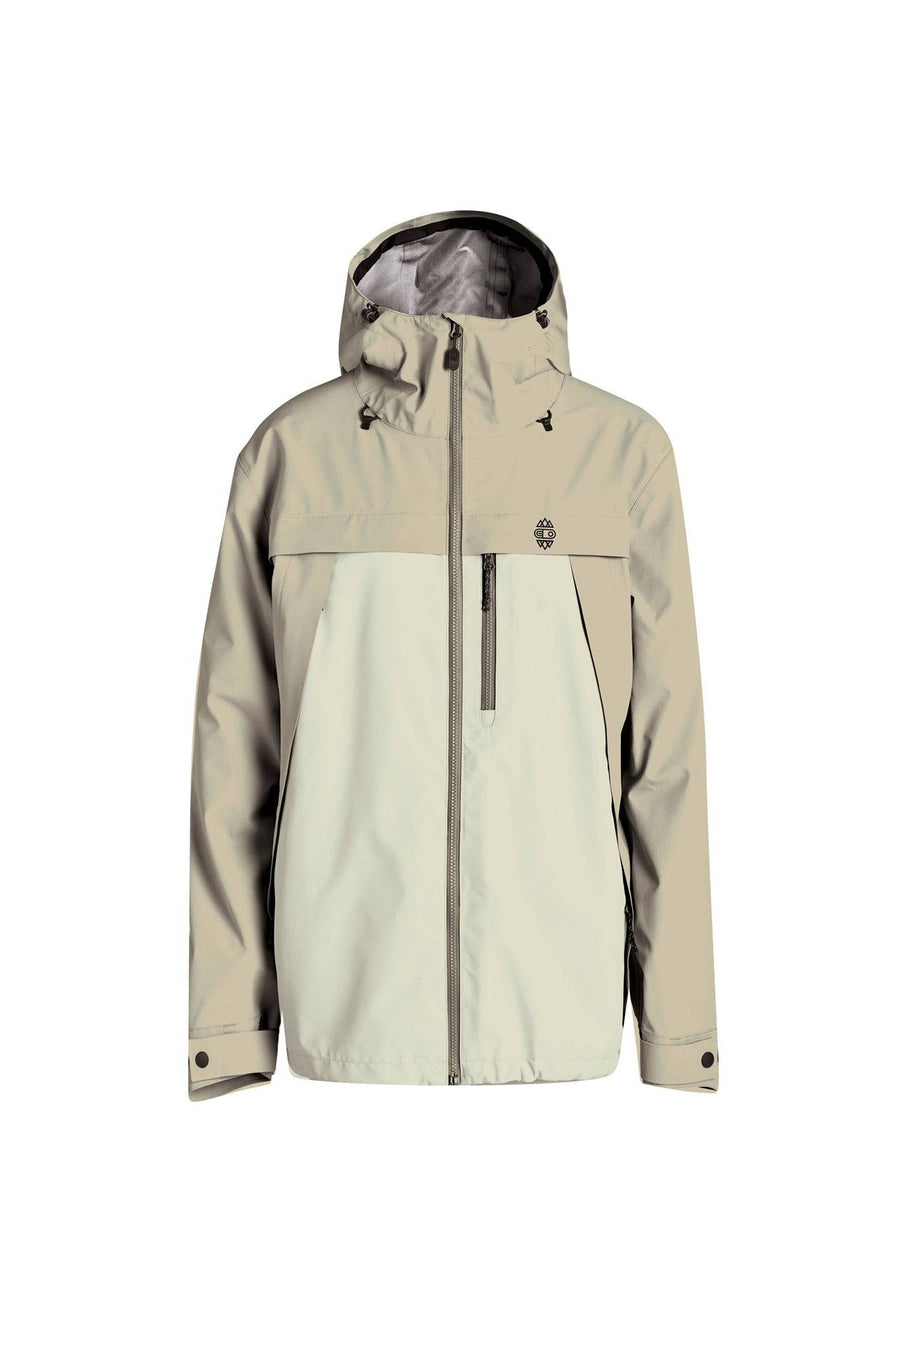 Airblaster Beast 3L Jacket in Chinchilla and Sand 2023